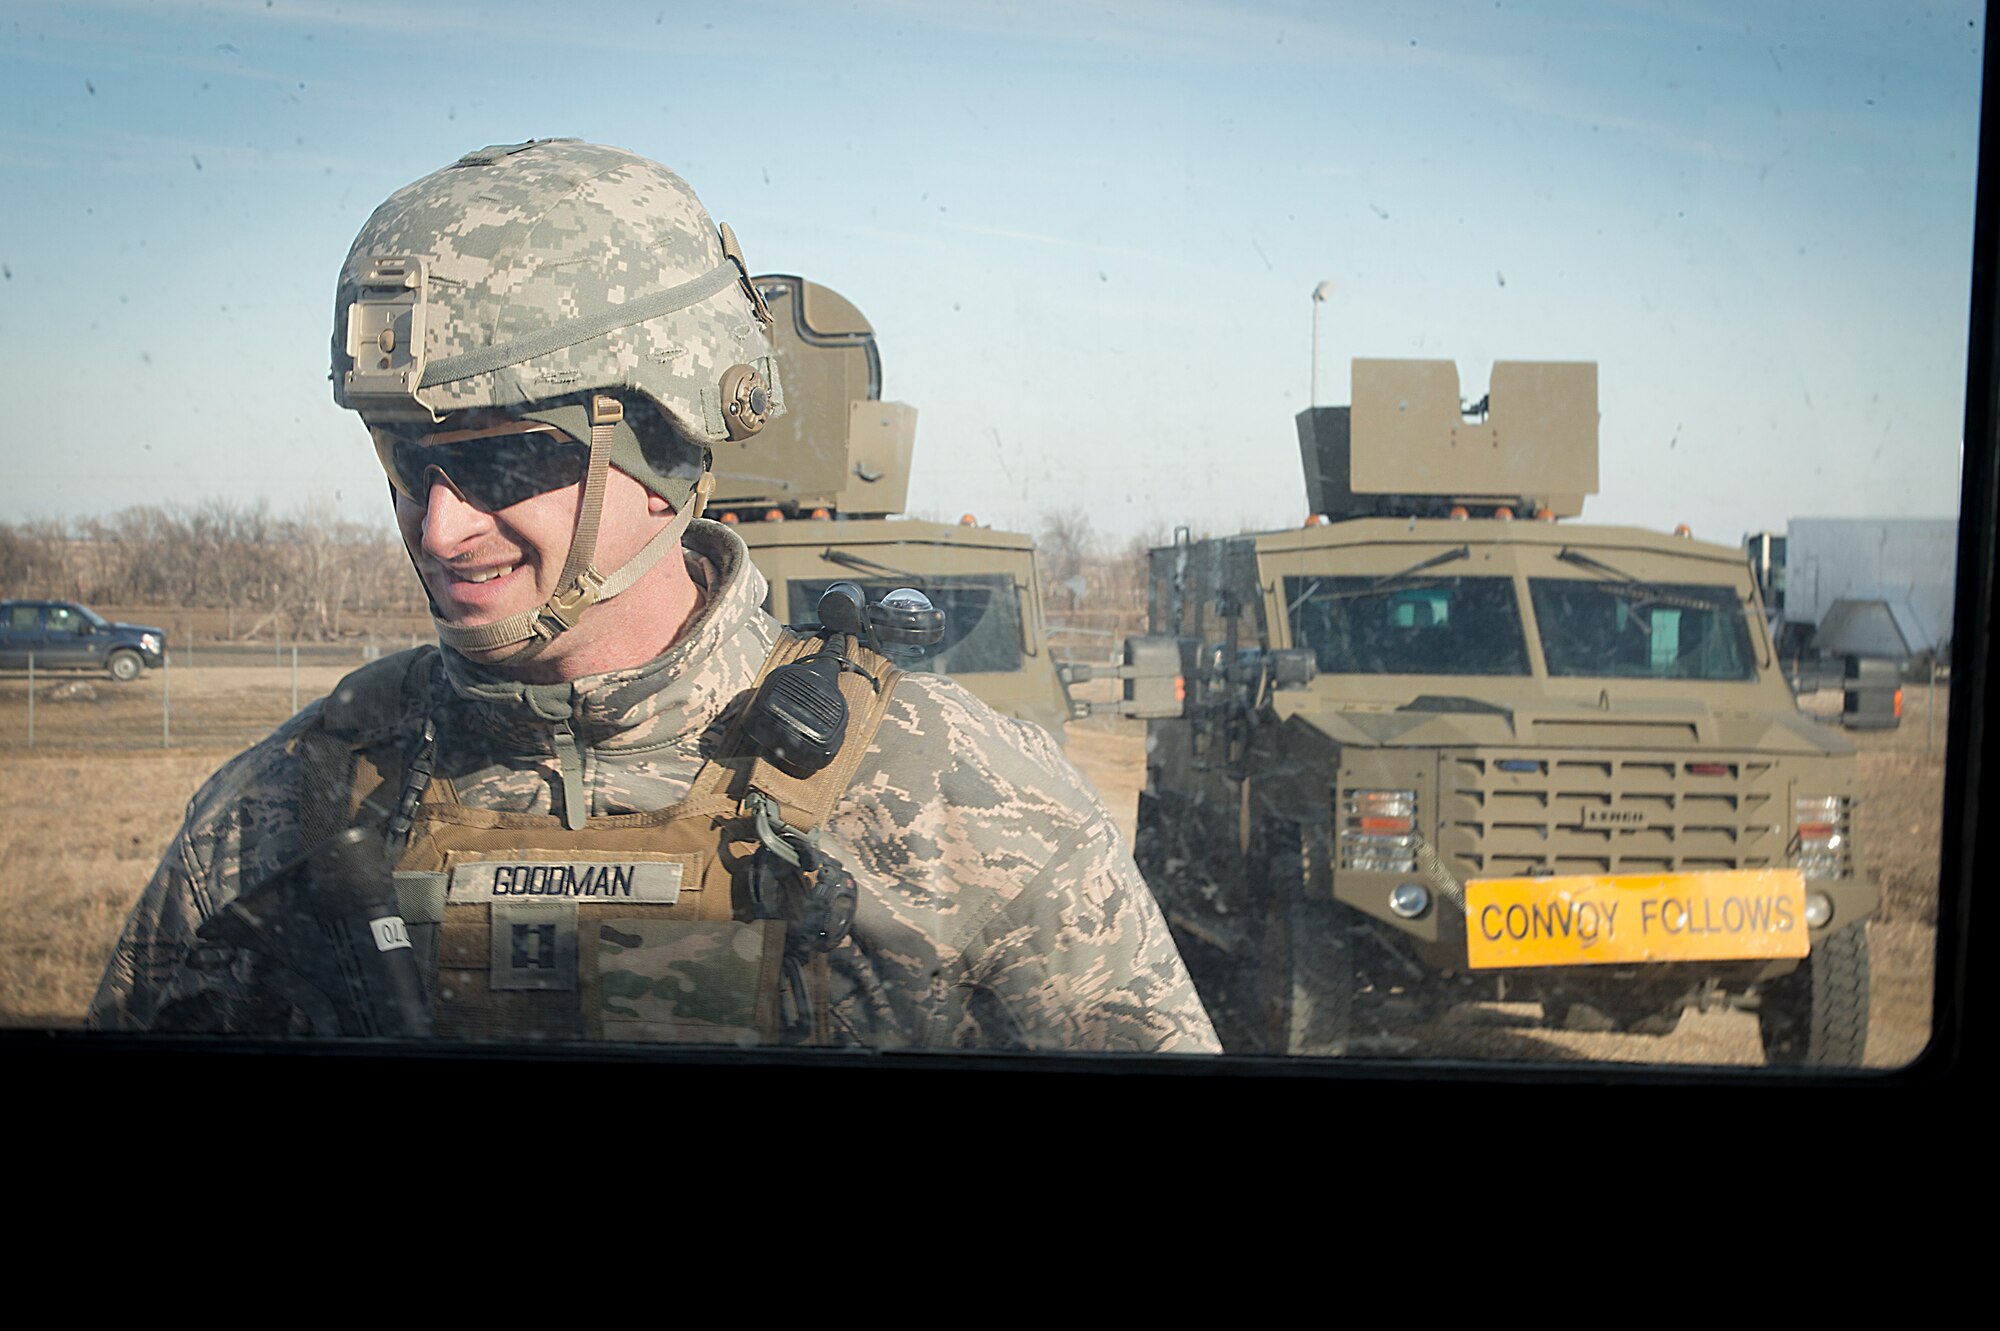 Capt. Greg Goodman, North Dakota Air National Guard, 219th Security Force Squadron operations officer, leads a convoy in the 91st Missile Wing missile complex, March 12, 2014. Goodman was the first-ever guardsman to become certified as a convoy commander in the history of the Air Force. (U.S. Air Force photo/Tech. Sgt. Aaron Allmon)